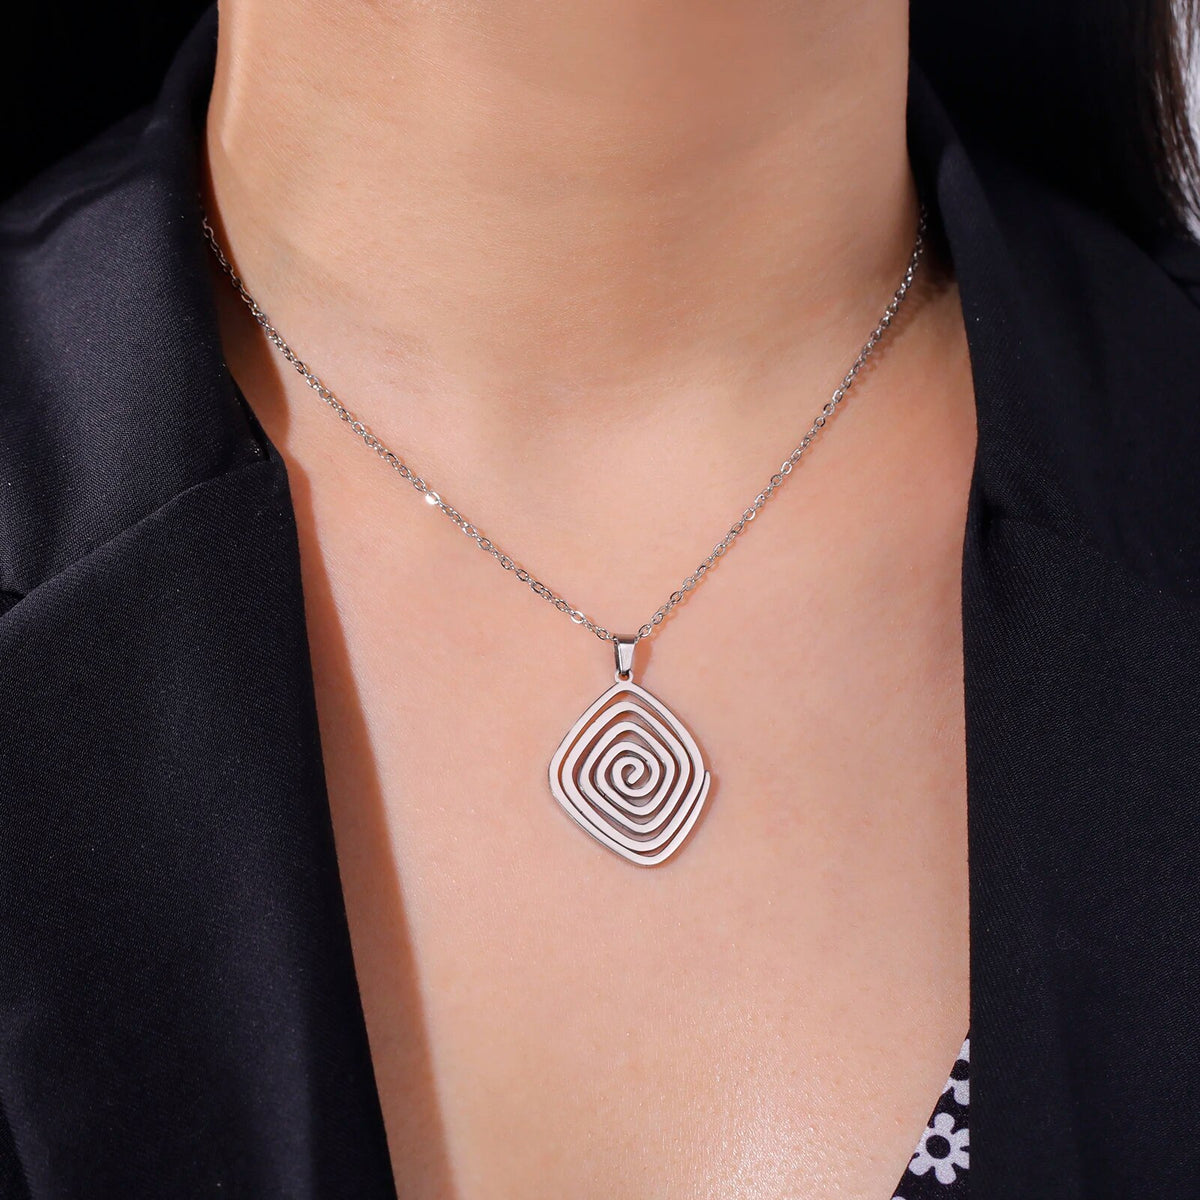 Necklace with spiral pendant